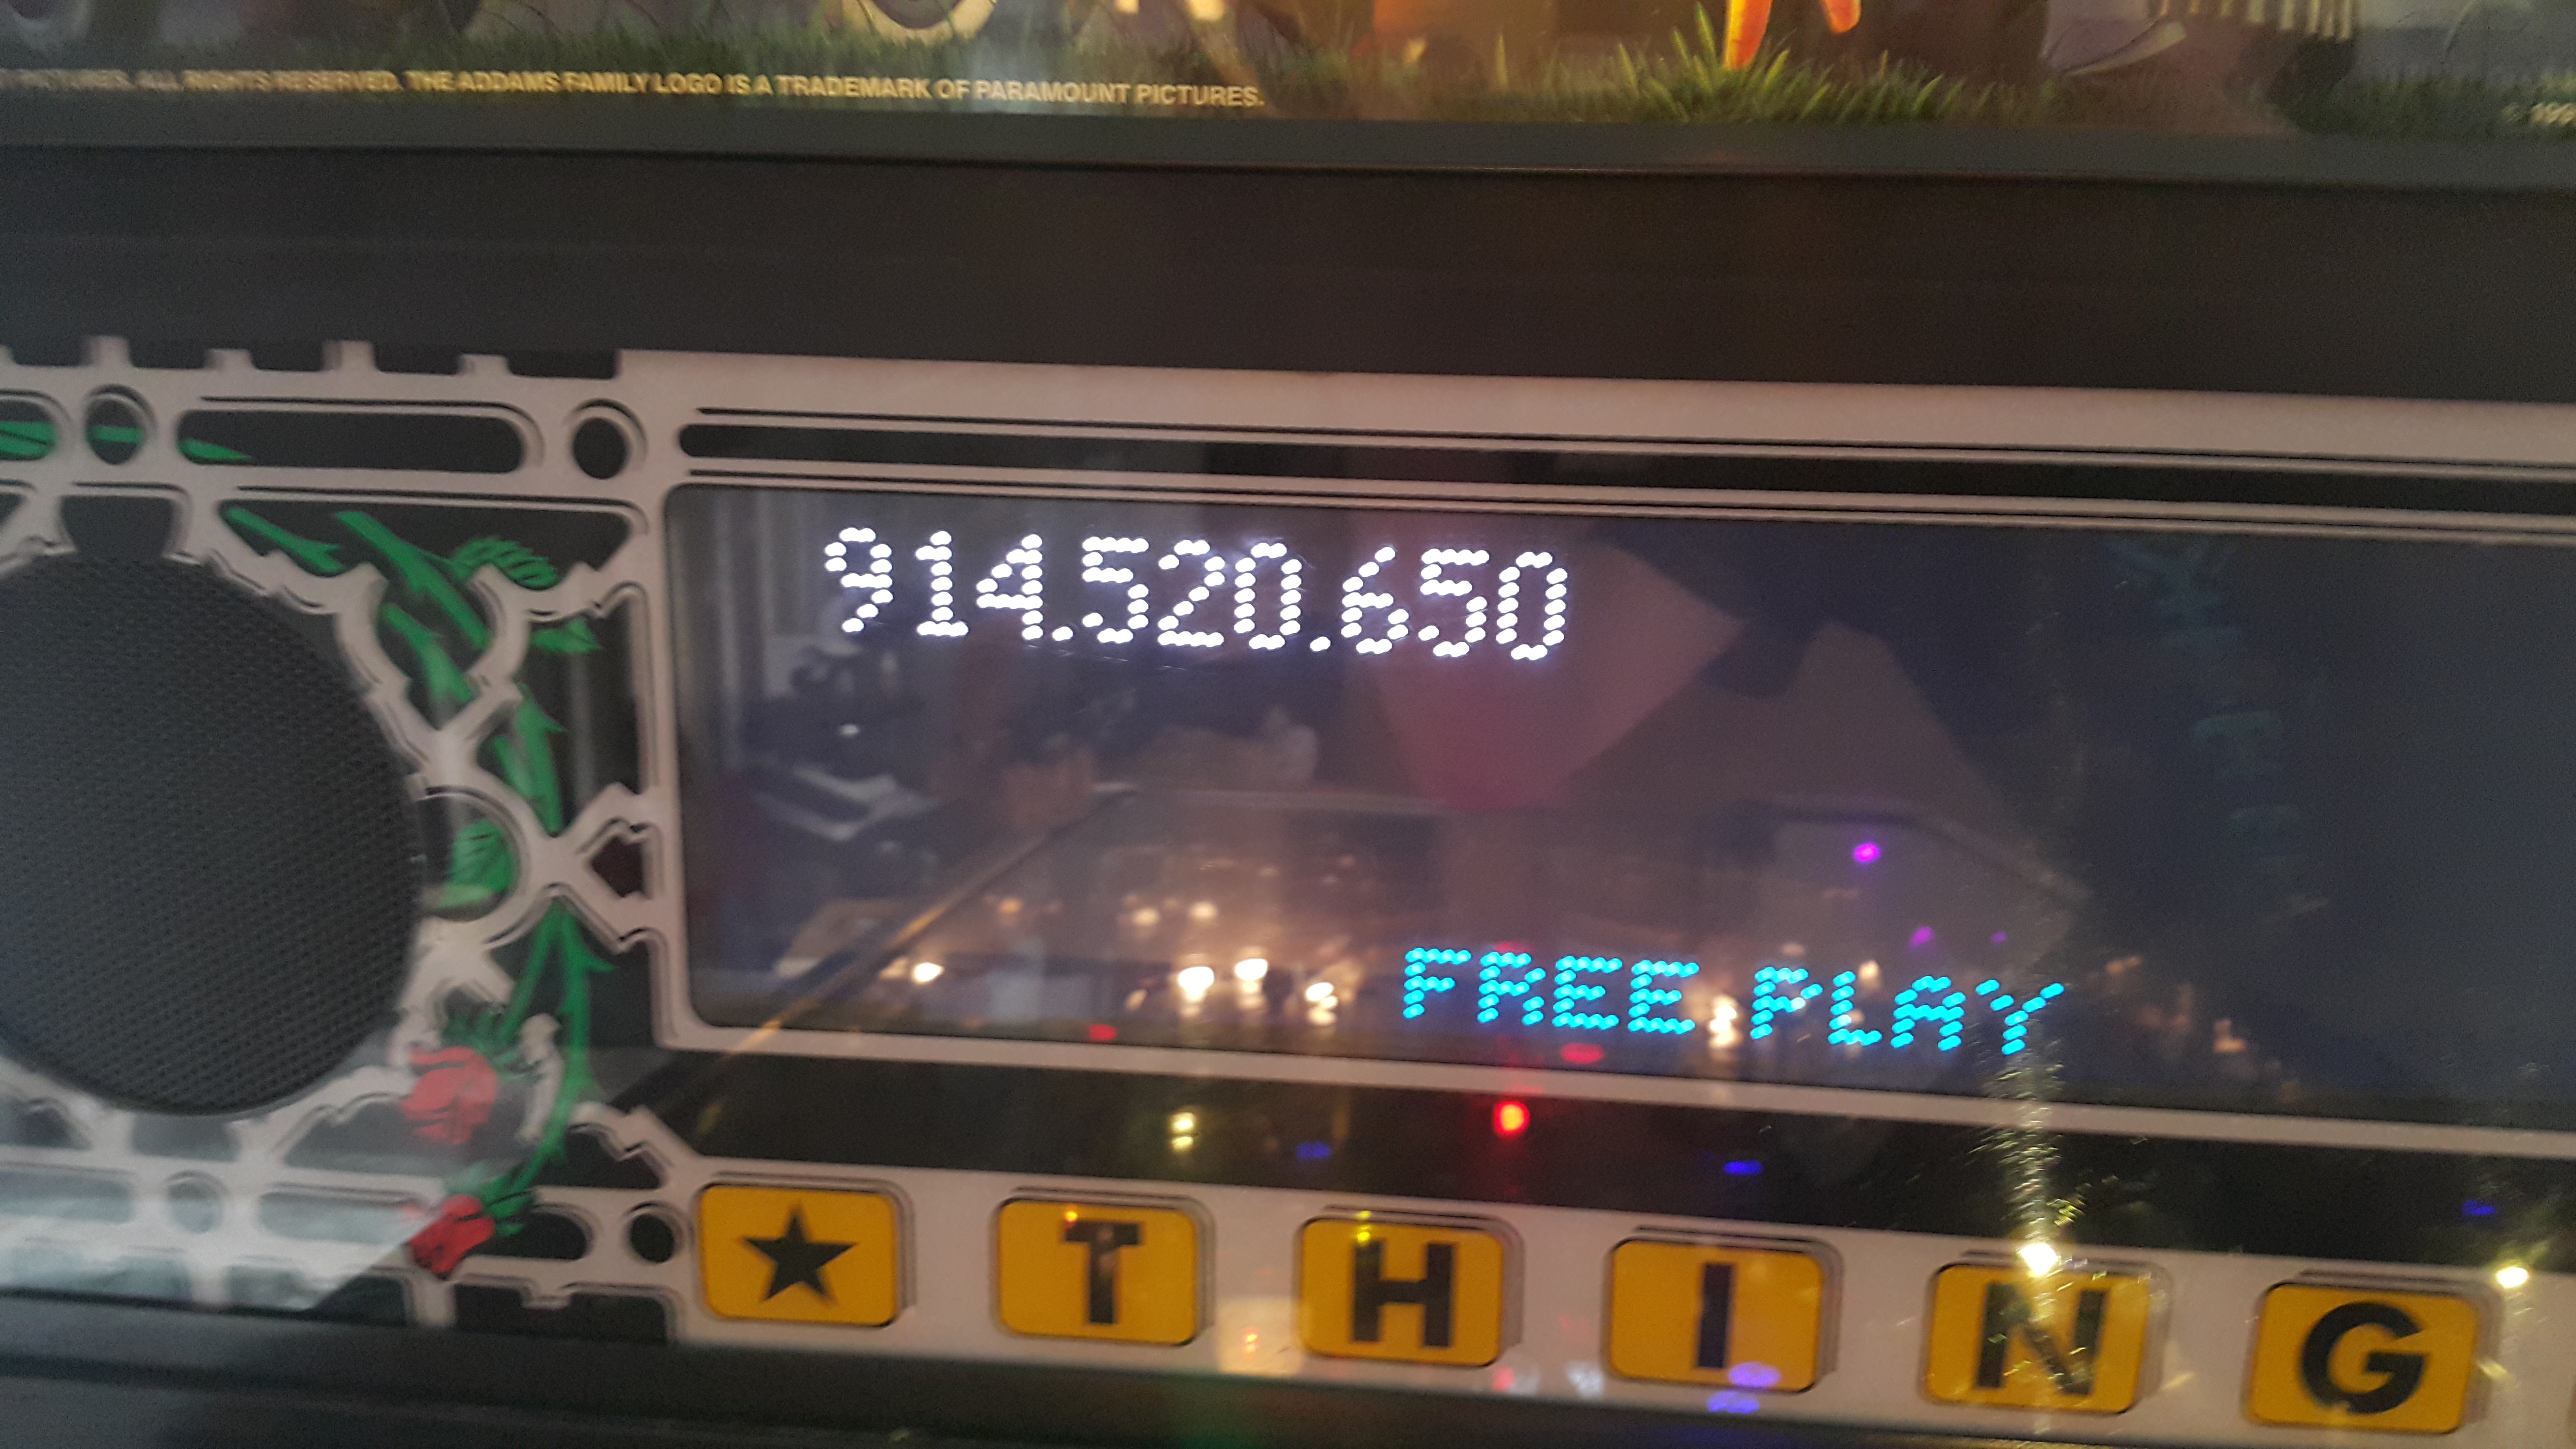 FoolonFruity: The Addams Family (Pinball: 3 Balls) 914,520,650 points on 2017-08-15 13:19:04